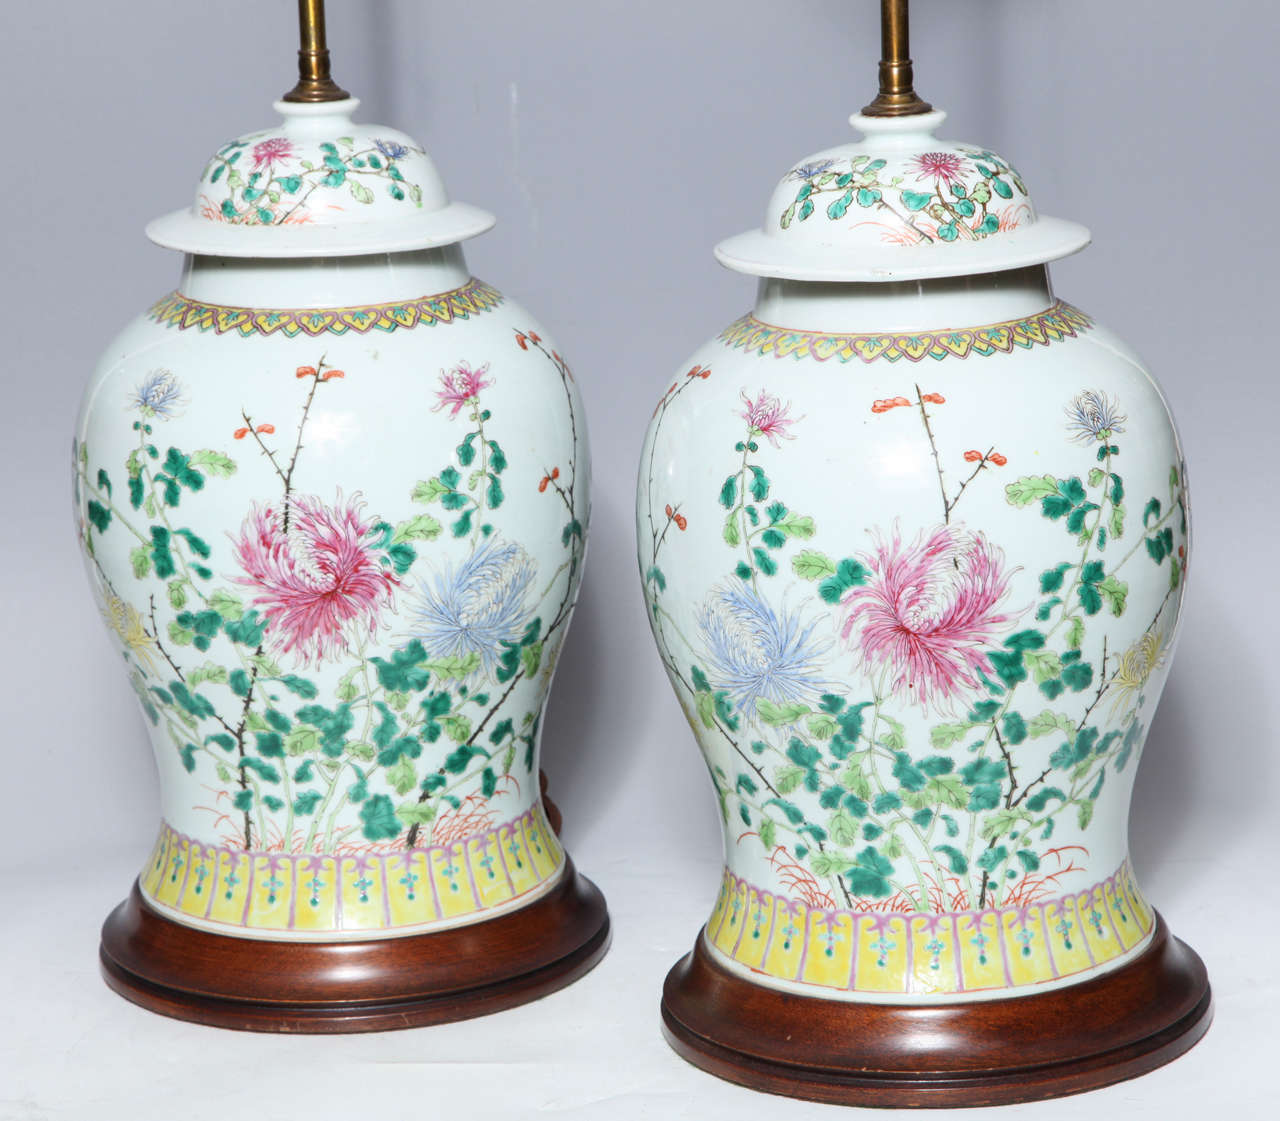 Pair of 19th Century Chinese Porcelain Ginger Jars Converted into Table Lamps In Excellent Condition For Sale In New York, NY